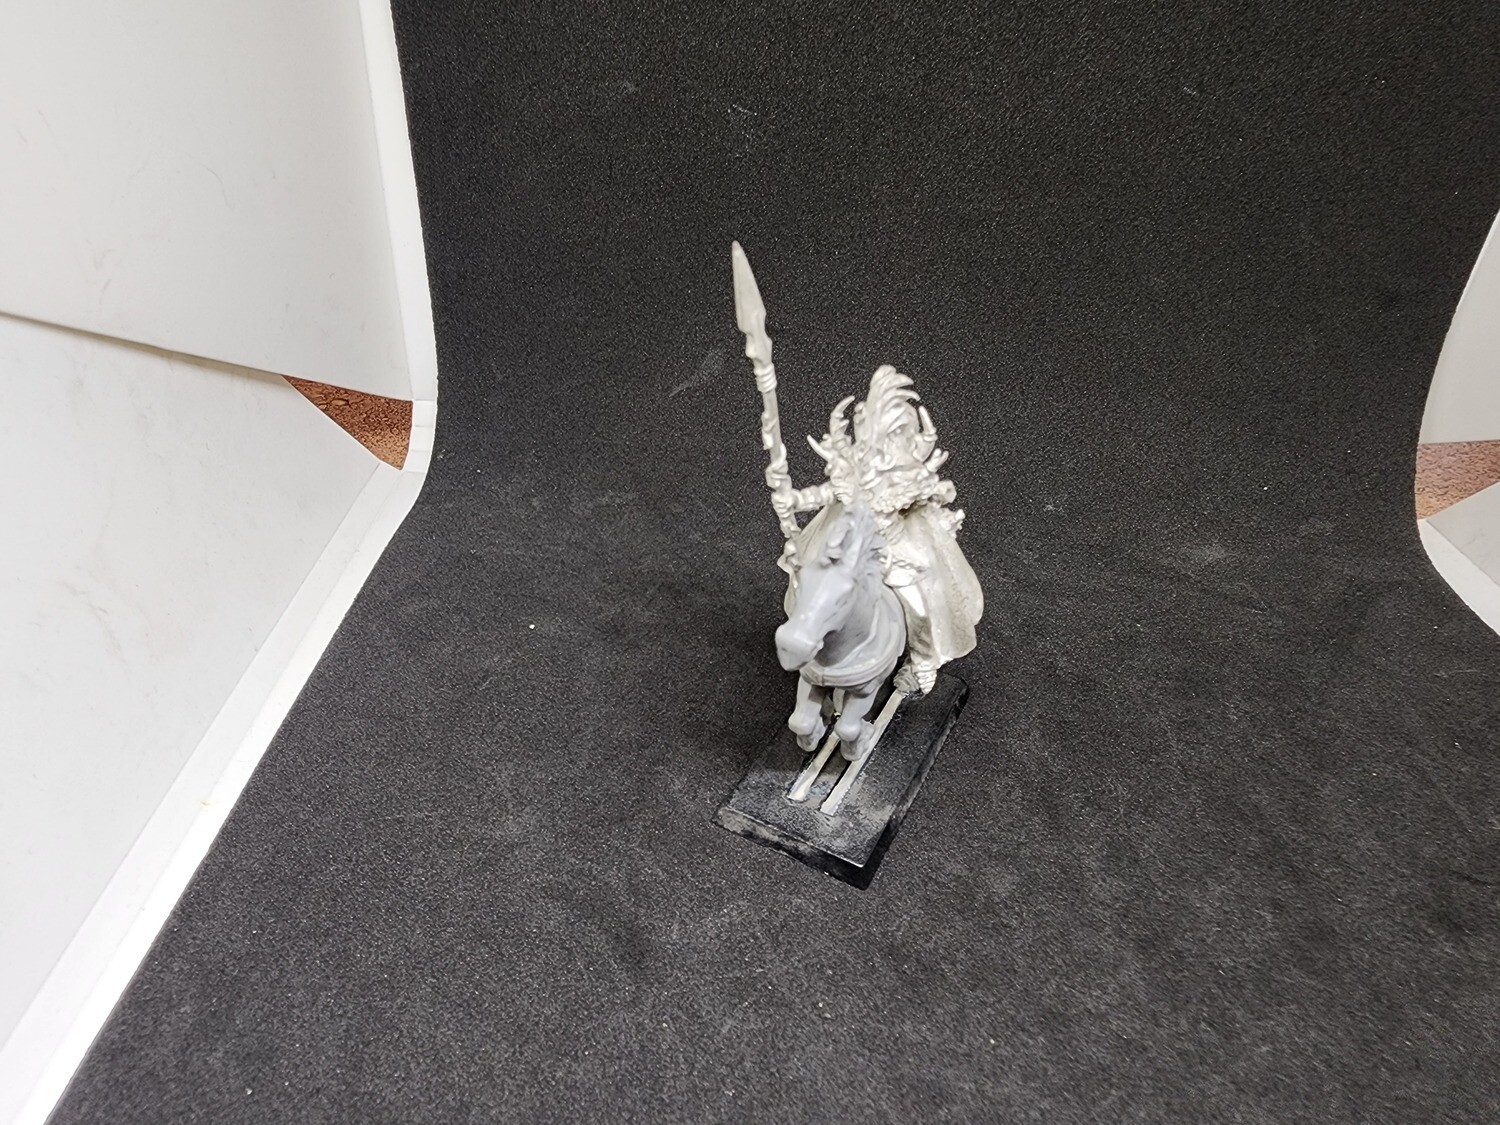 Used Warhammer Mounted Model #10 (AoS/Old World)